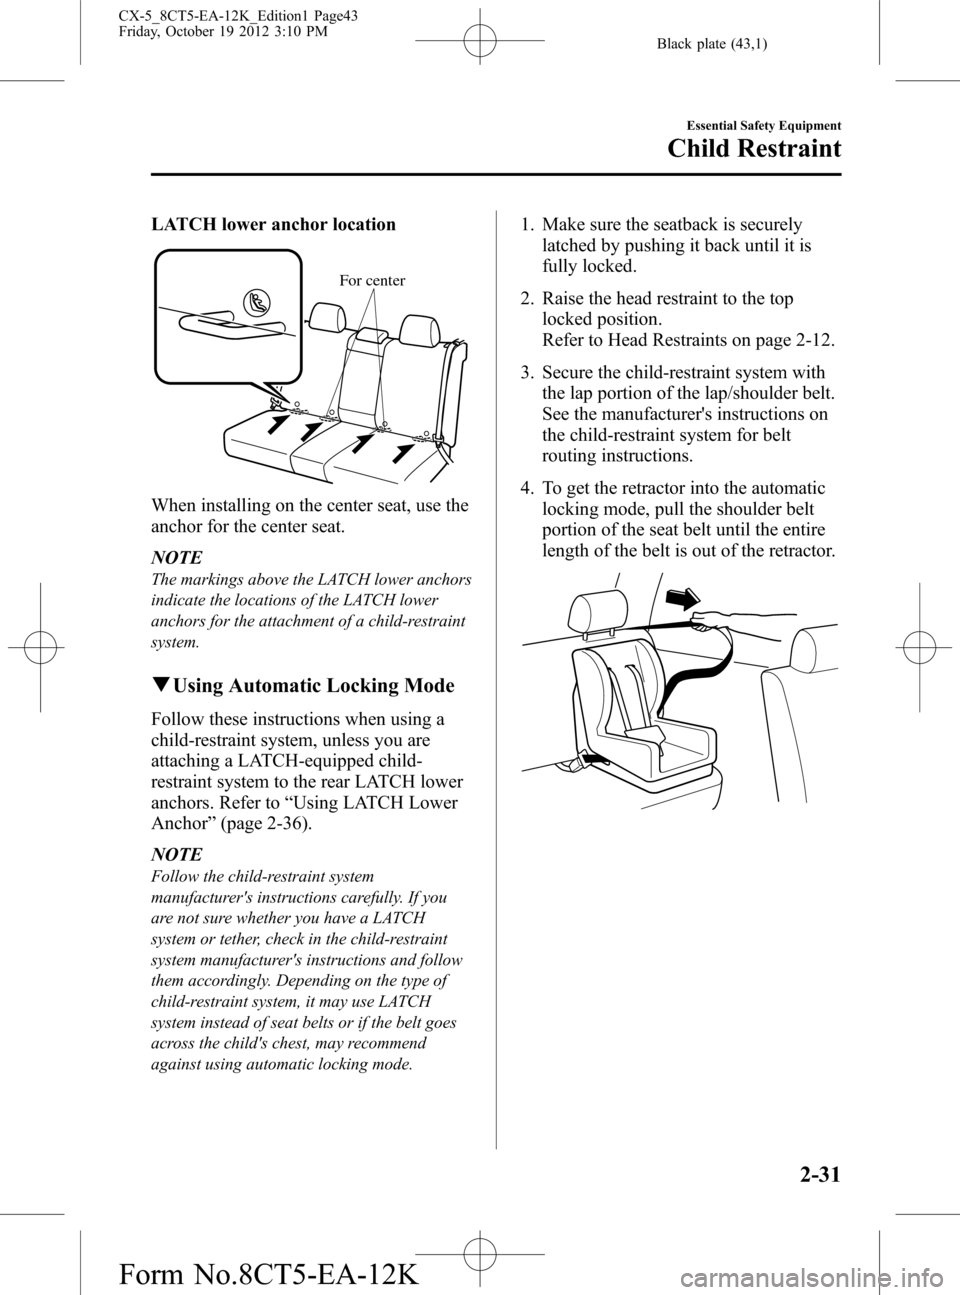 MAZDA MODEL CX-5 2014  Owners Manual (in English) Black plate (43,1)
LATCH lower anchor location
For center
When installing on the center seat, use the
anchor for the center seat.
NOTE
The markings above the LATCH lower anchors
indicate the locations